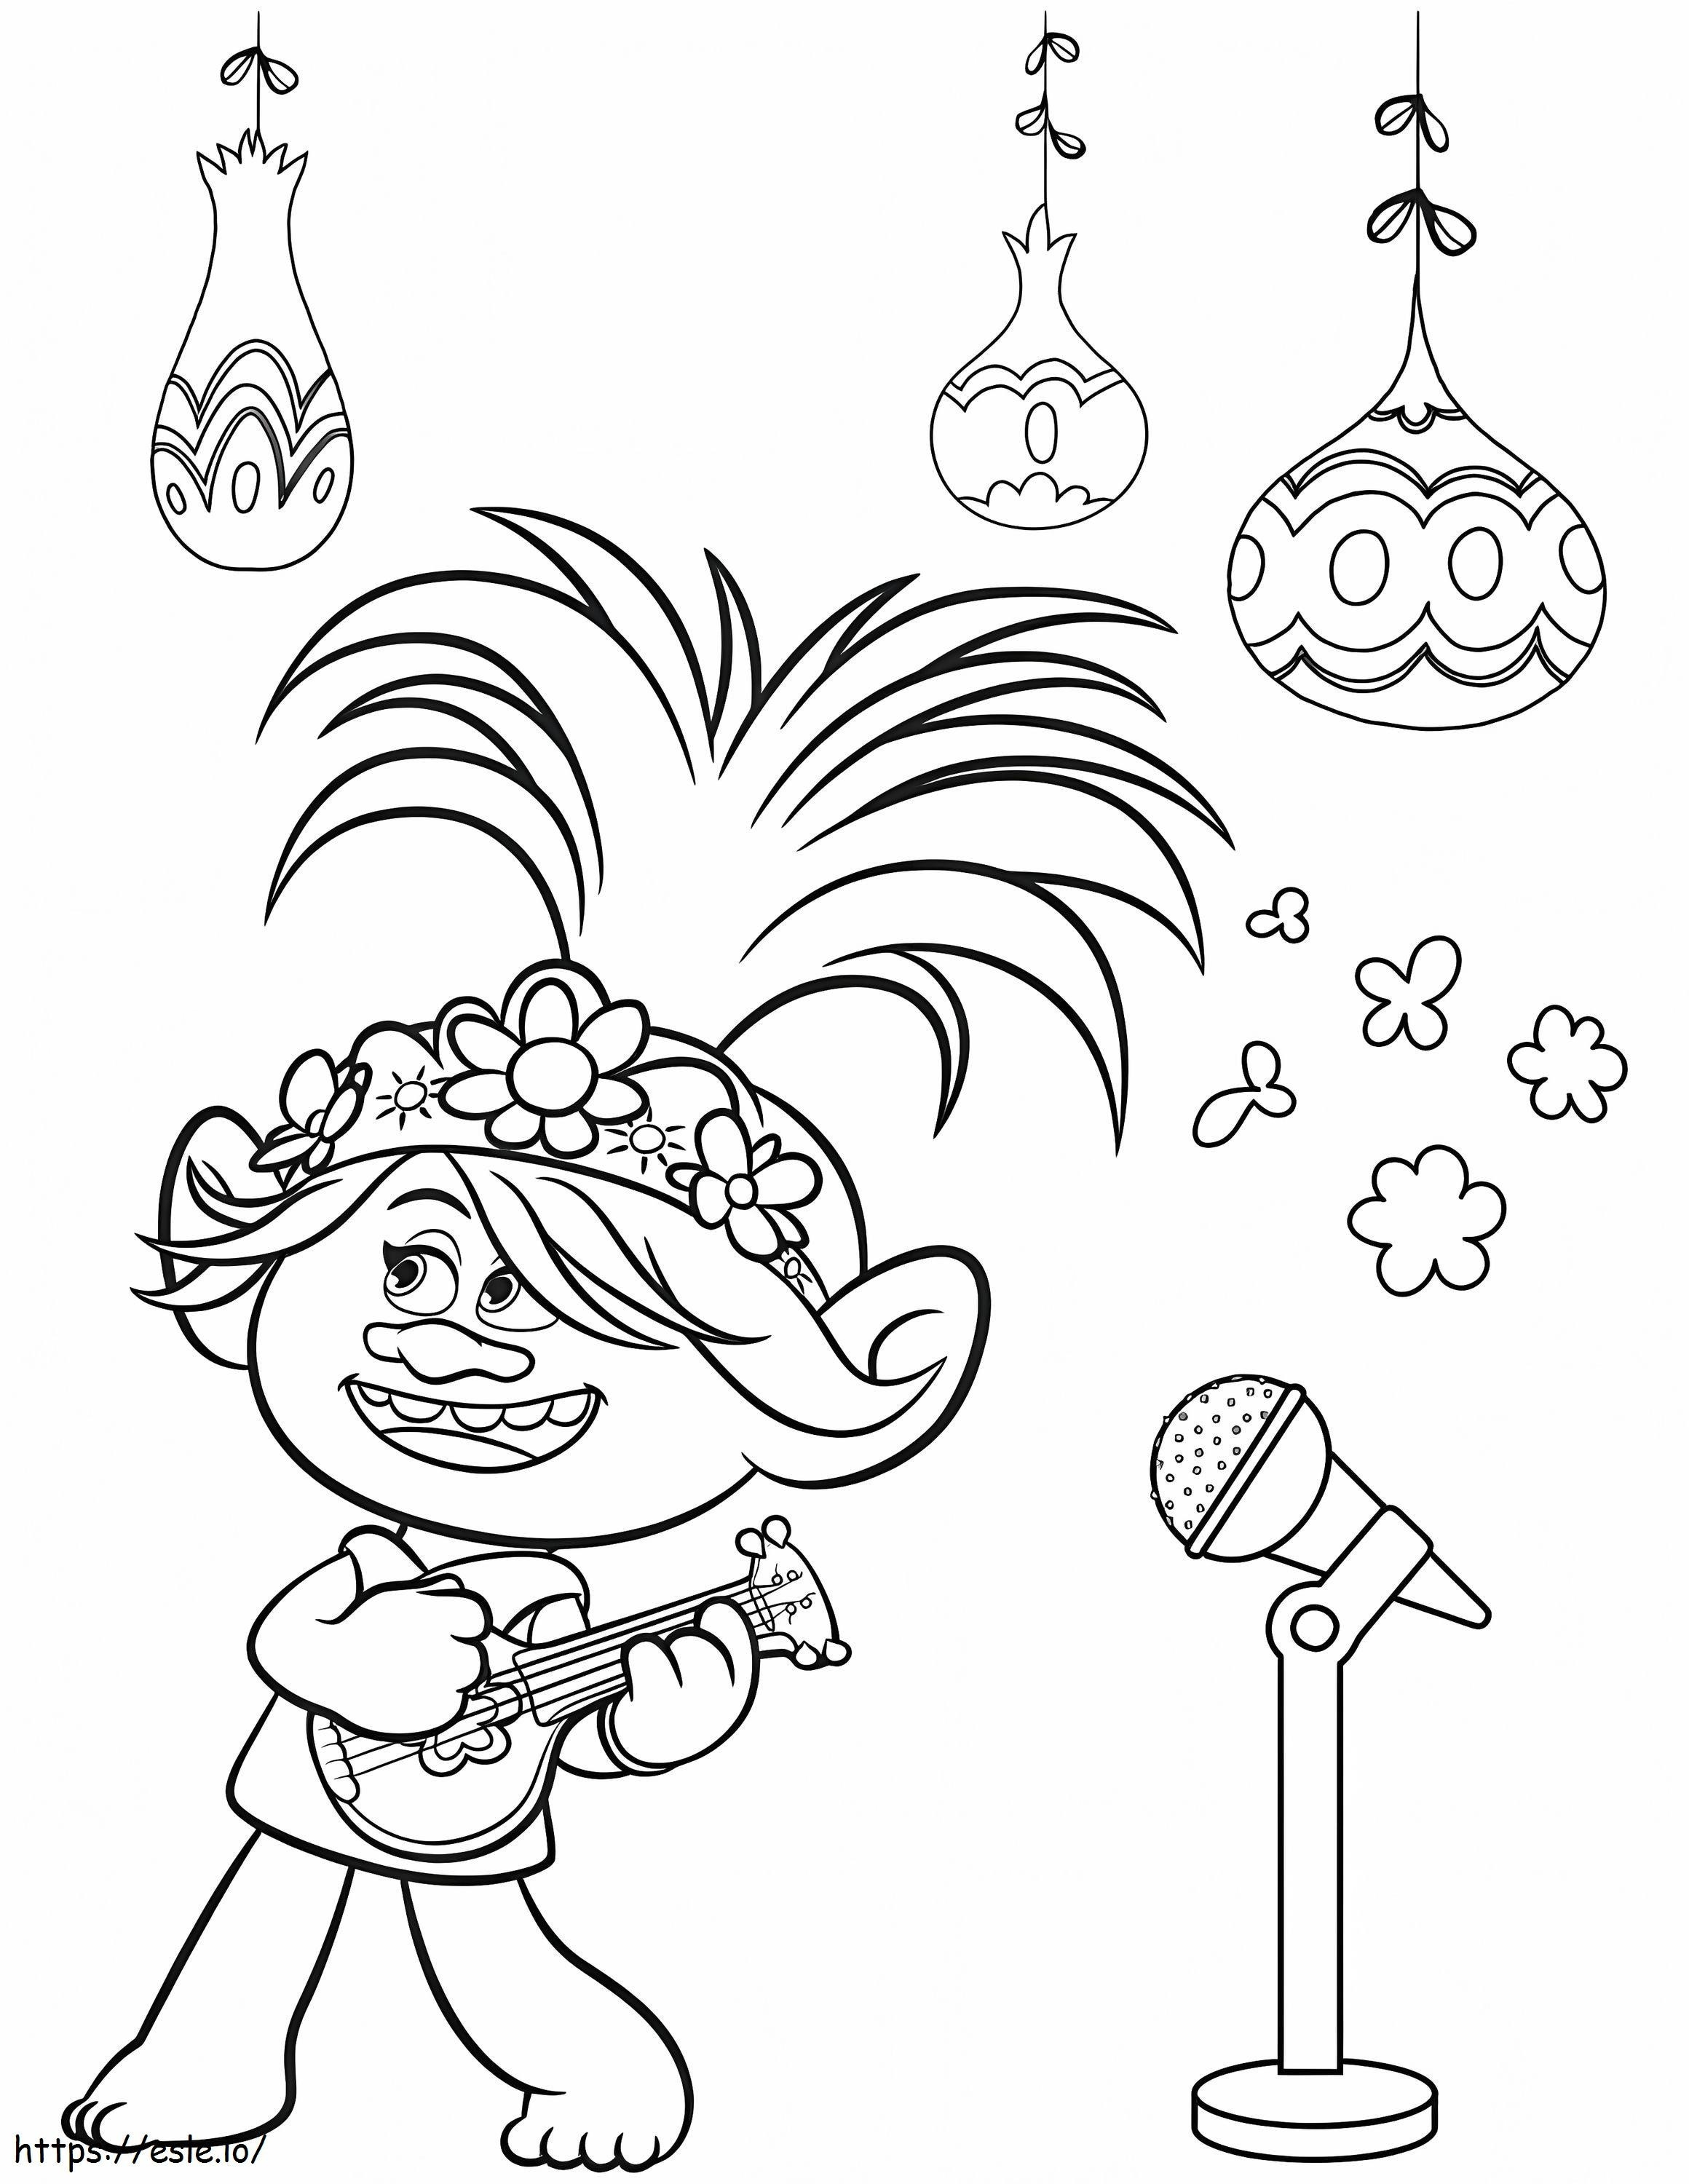 Singing Poppy coloring page